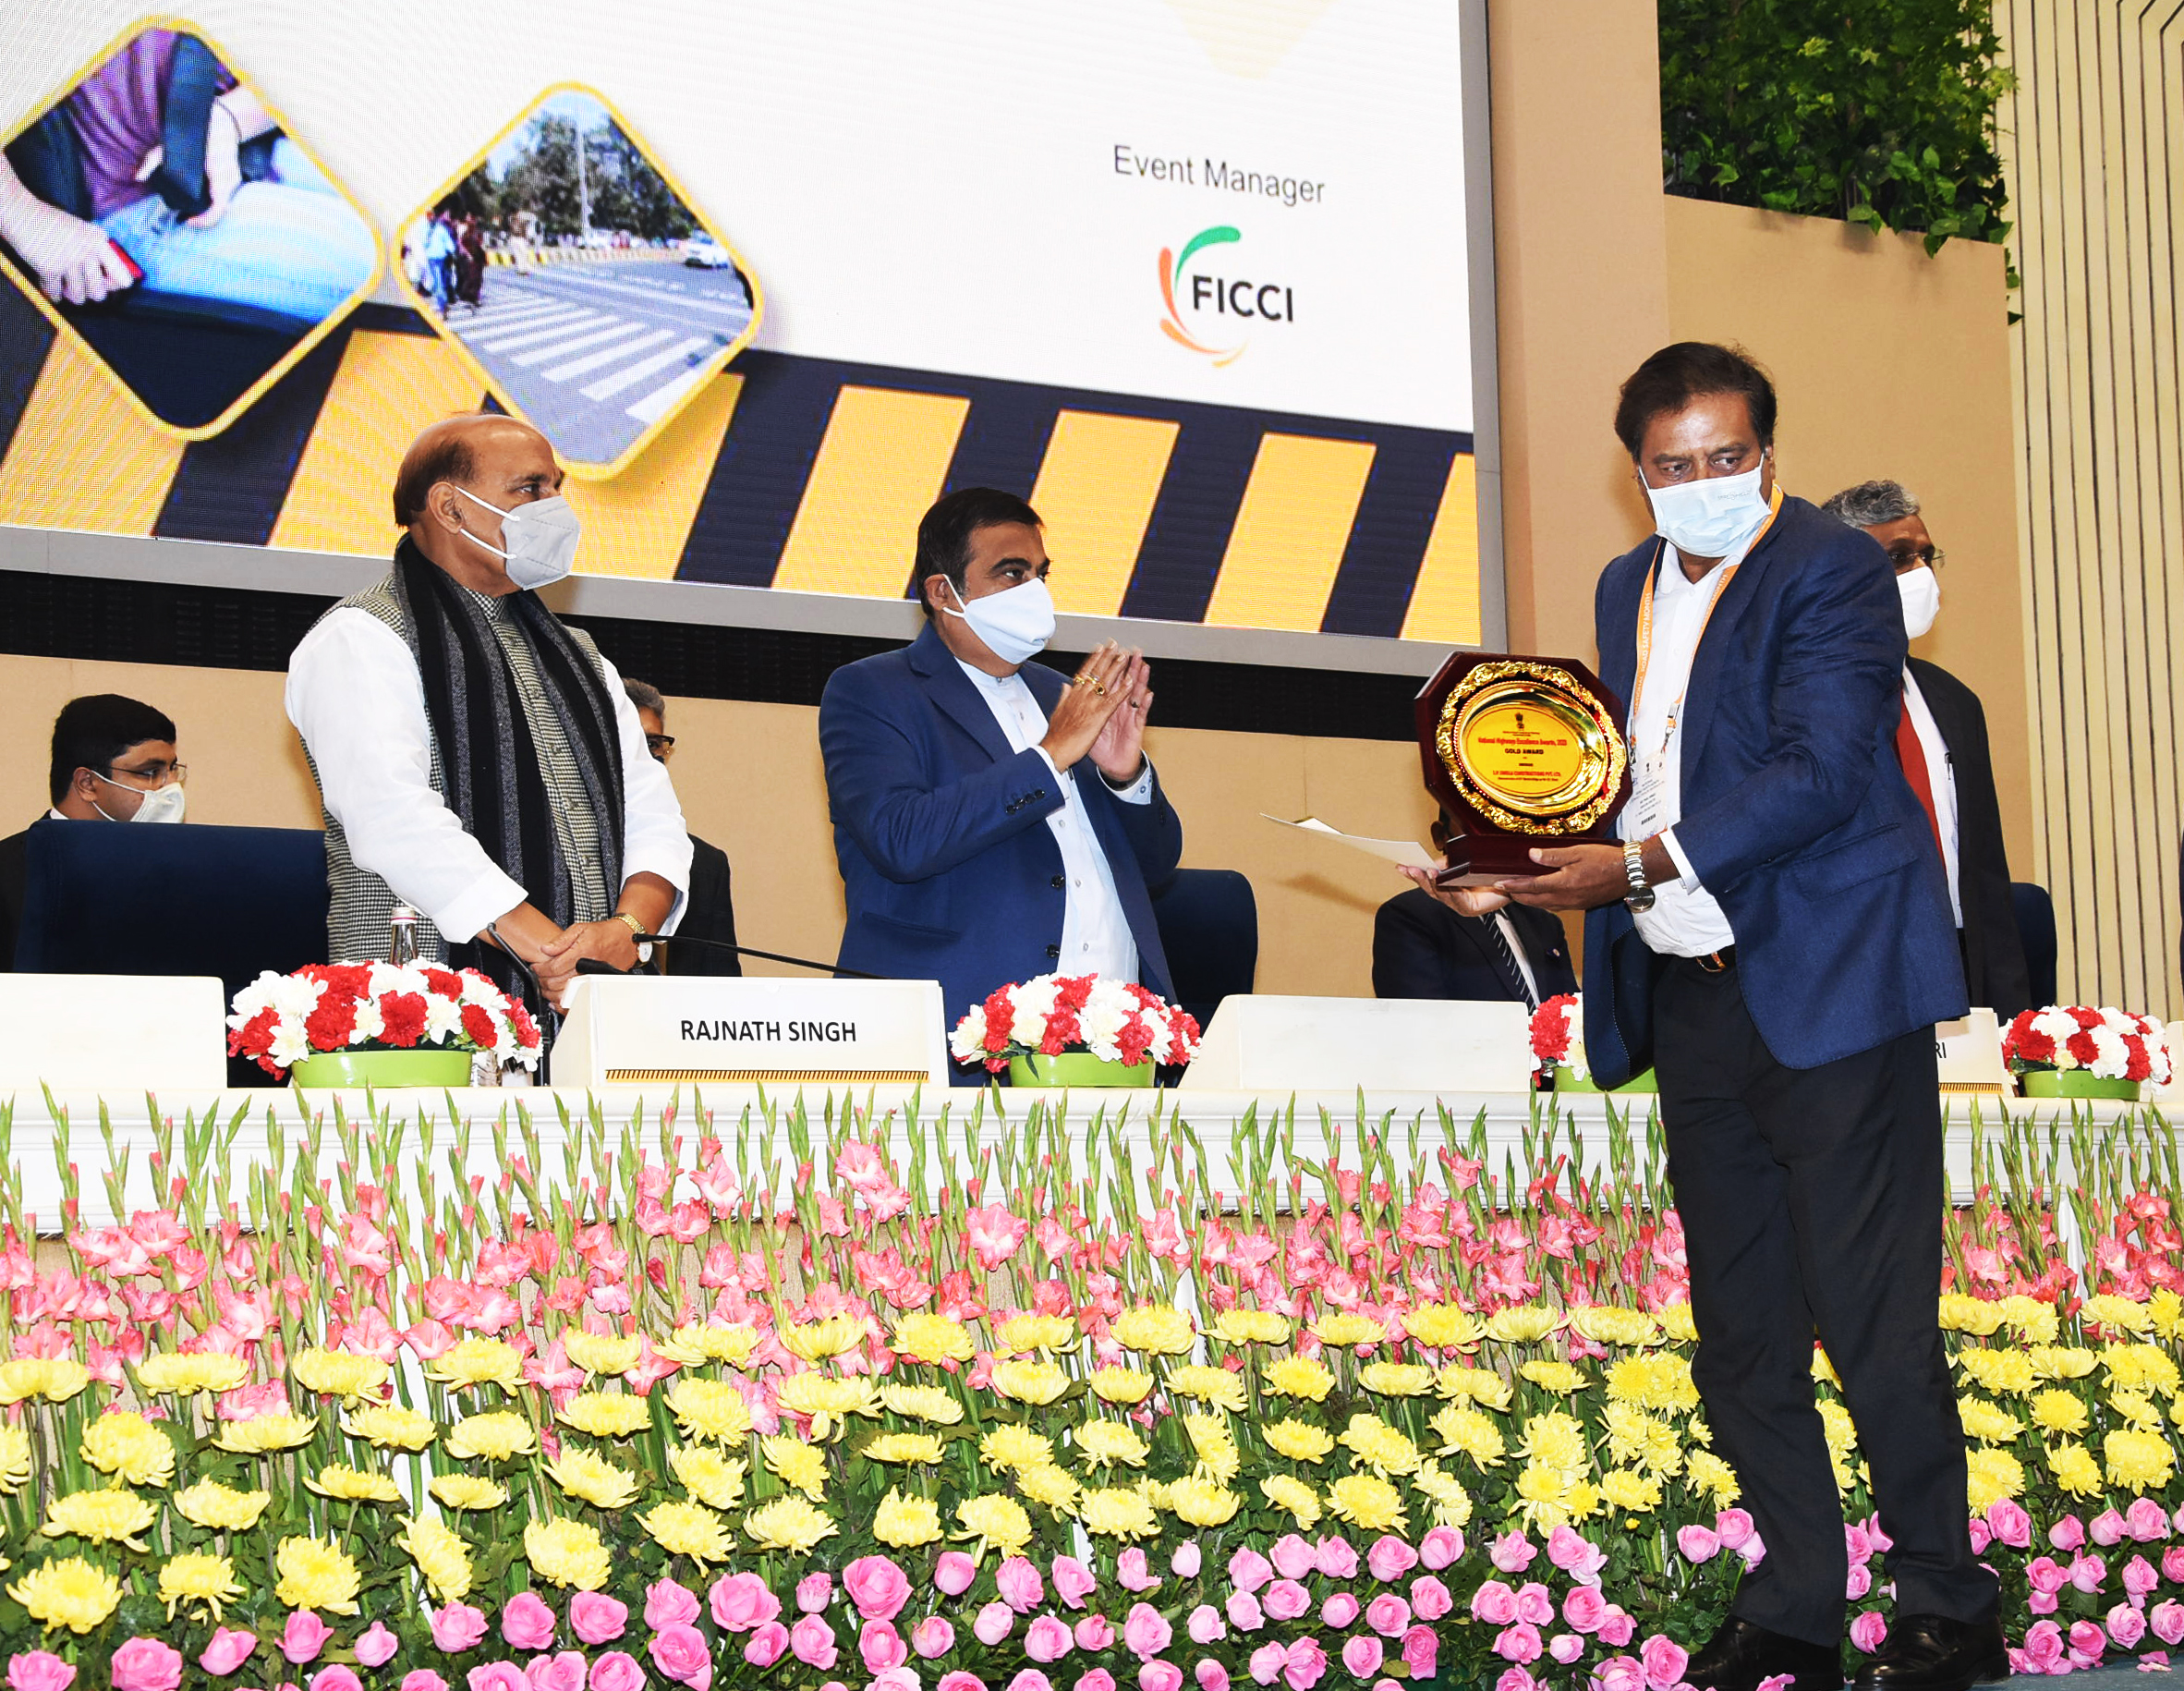 The company has been honoured with prestigious National Highways Excellence Award 2020 in Bridge catoegory by National Highway Authority of India (NHAI)